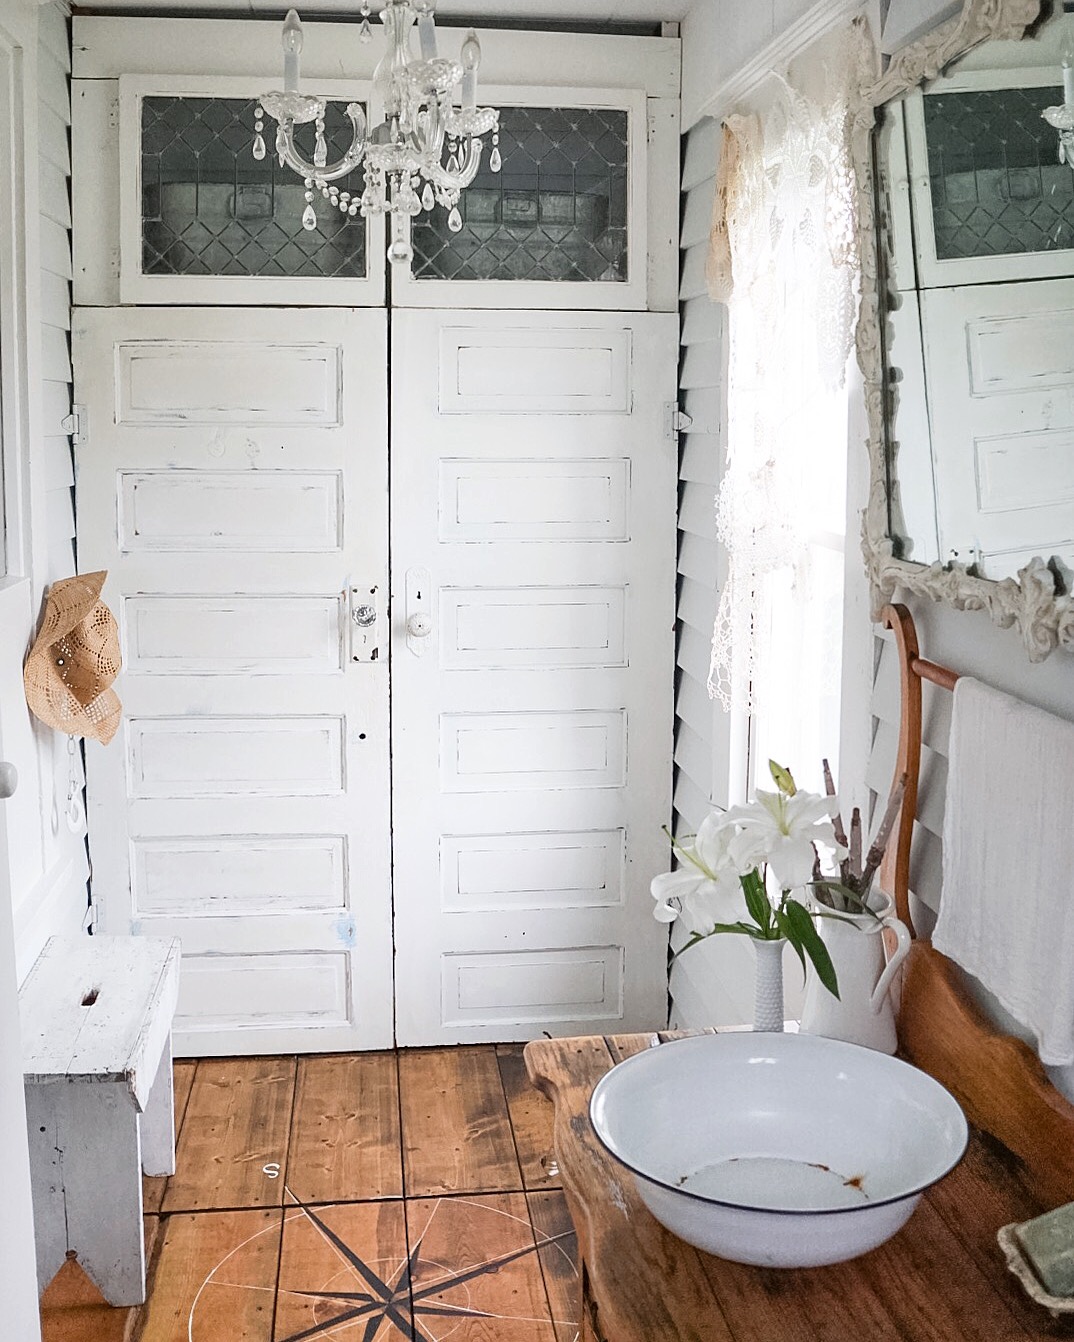 Old house mudroom - love the chippy cabinets and leaded glass kellyelko.com #farmhousestyle #farmhousedecor #oldhouse #mudroom